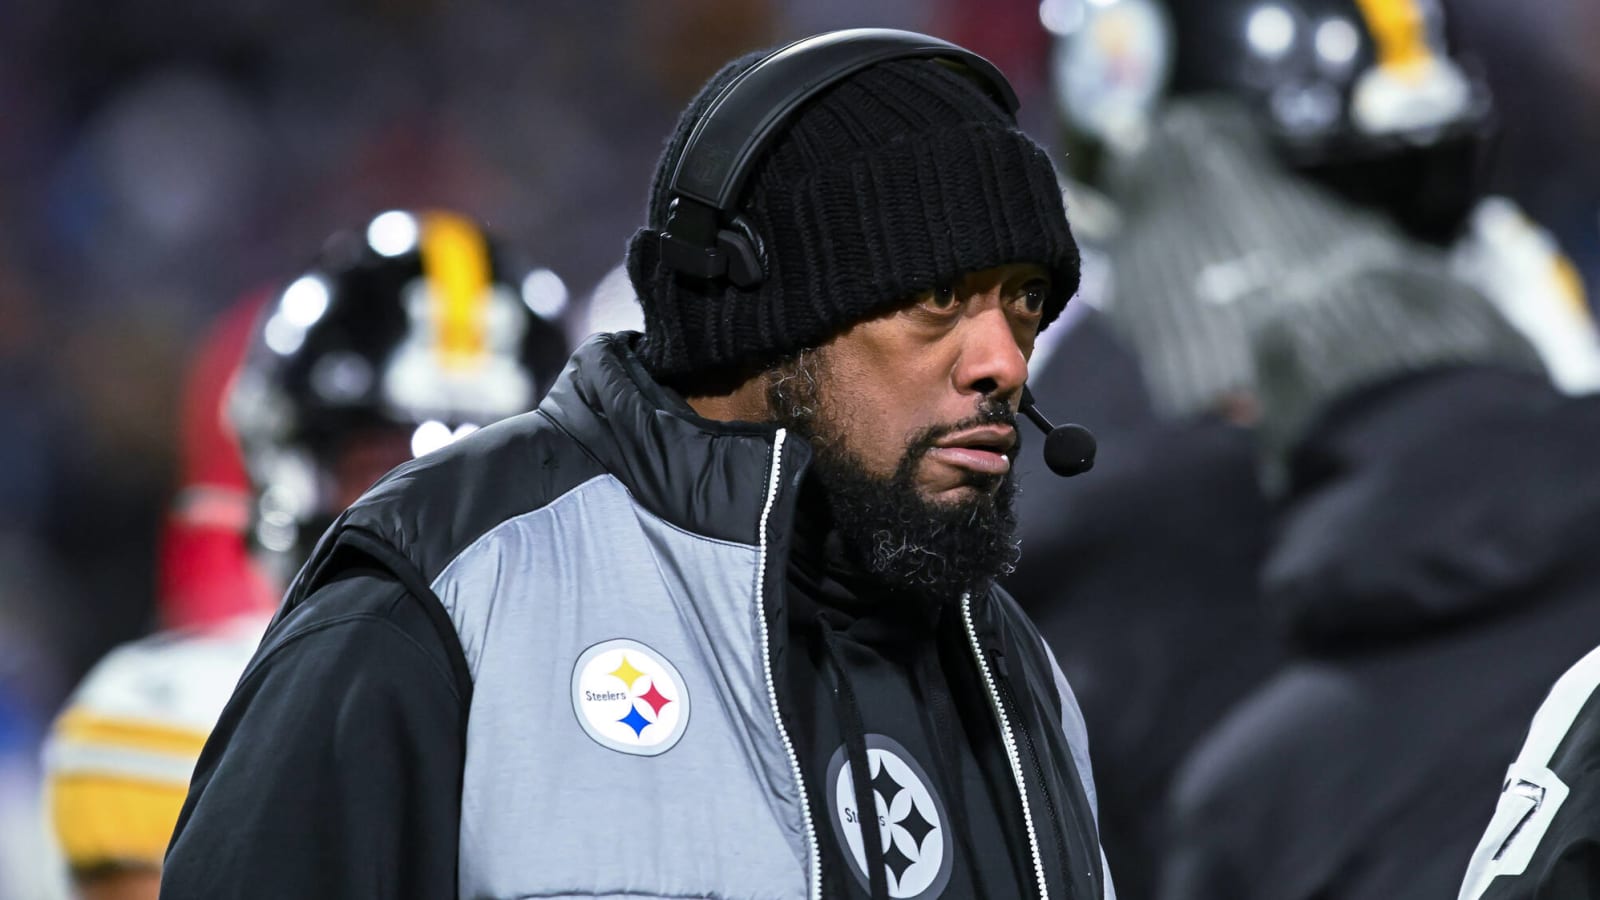 Steelers Get An Honest Explanation From The NFL For Grueling Schedule: 'Something They’ll Take A Look At In The Future'